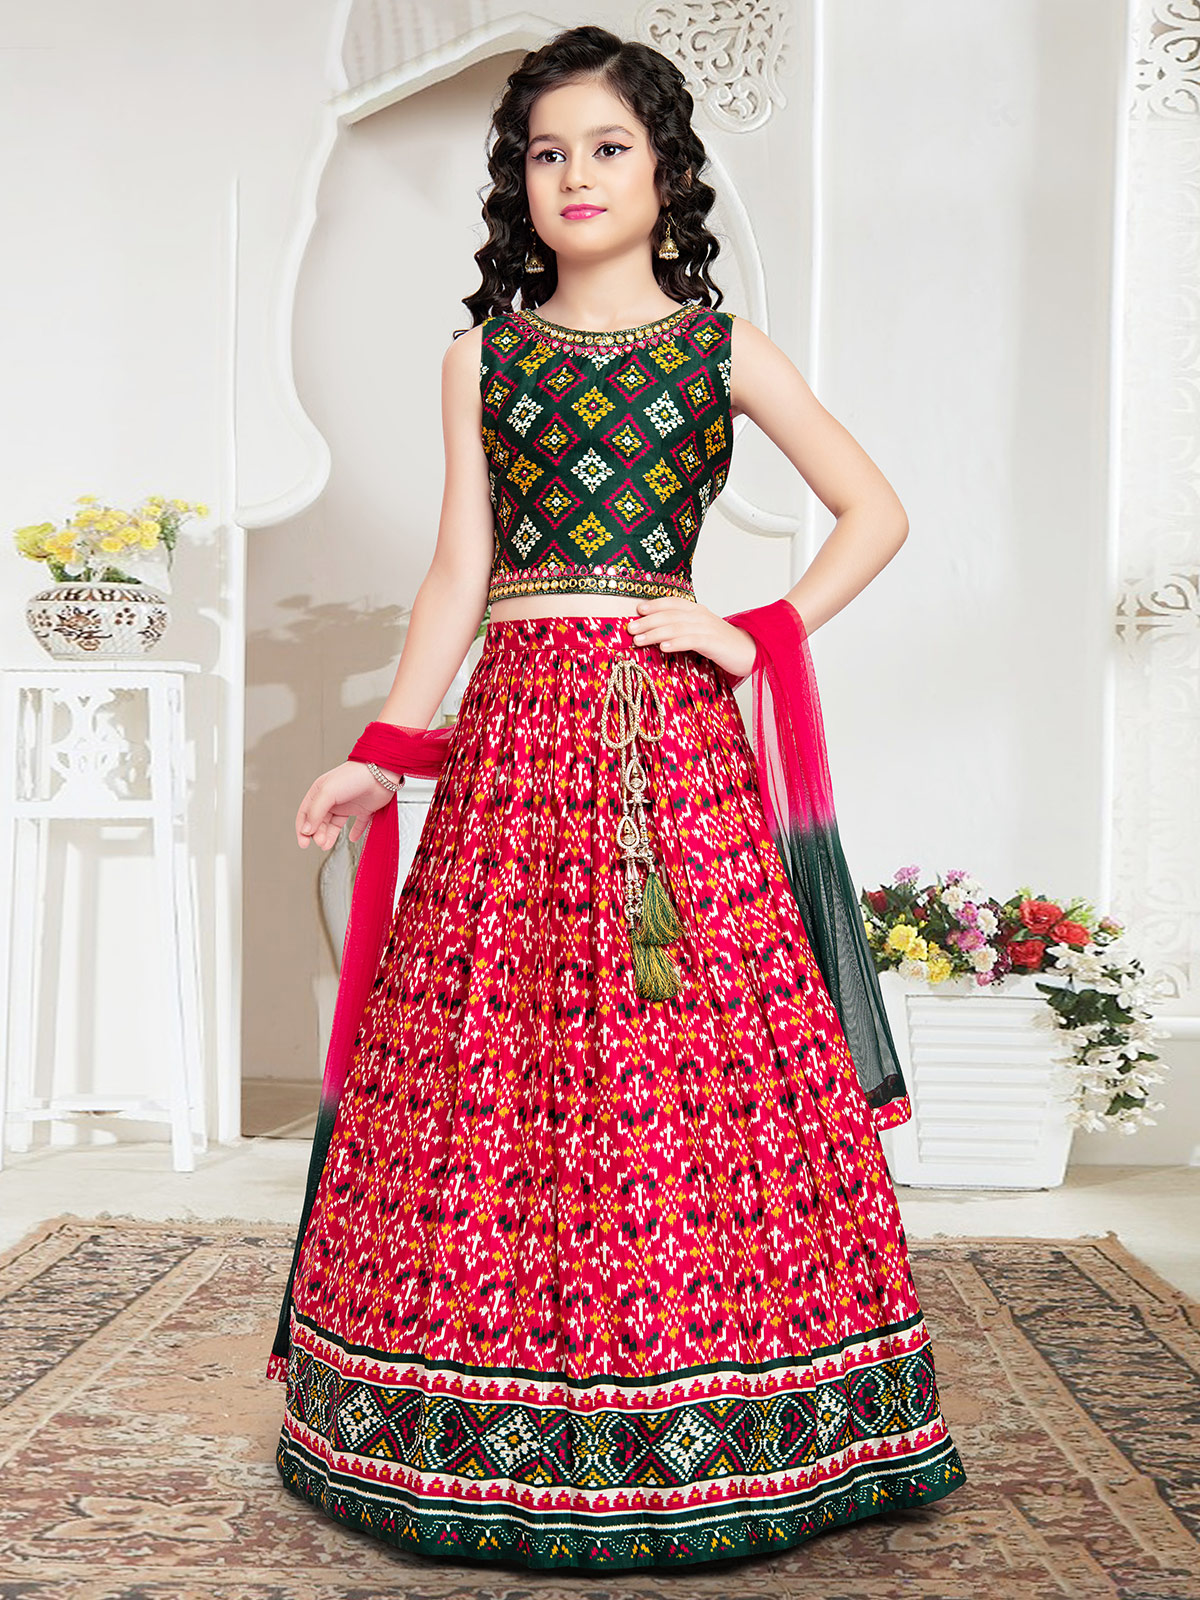 Fancy Inddus Brand Lehenga Choli At Online at Rs.2599/Piece in surat offer  by Inddus